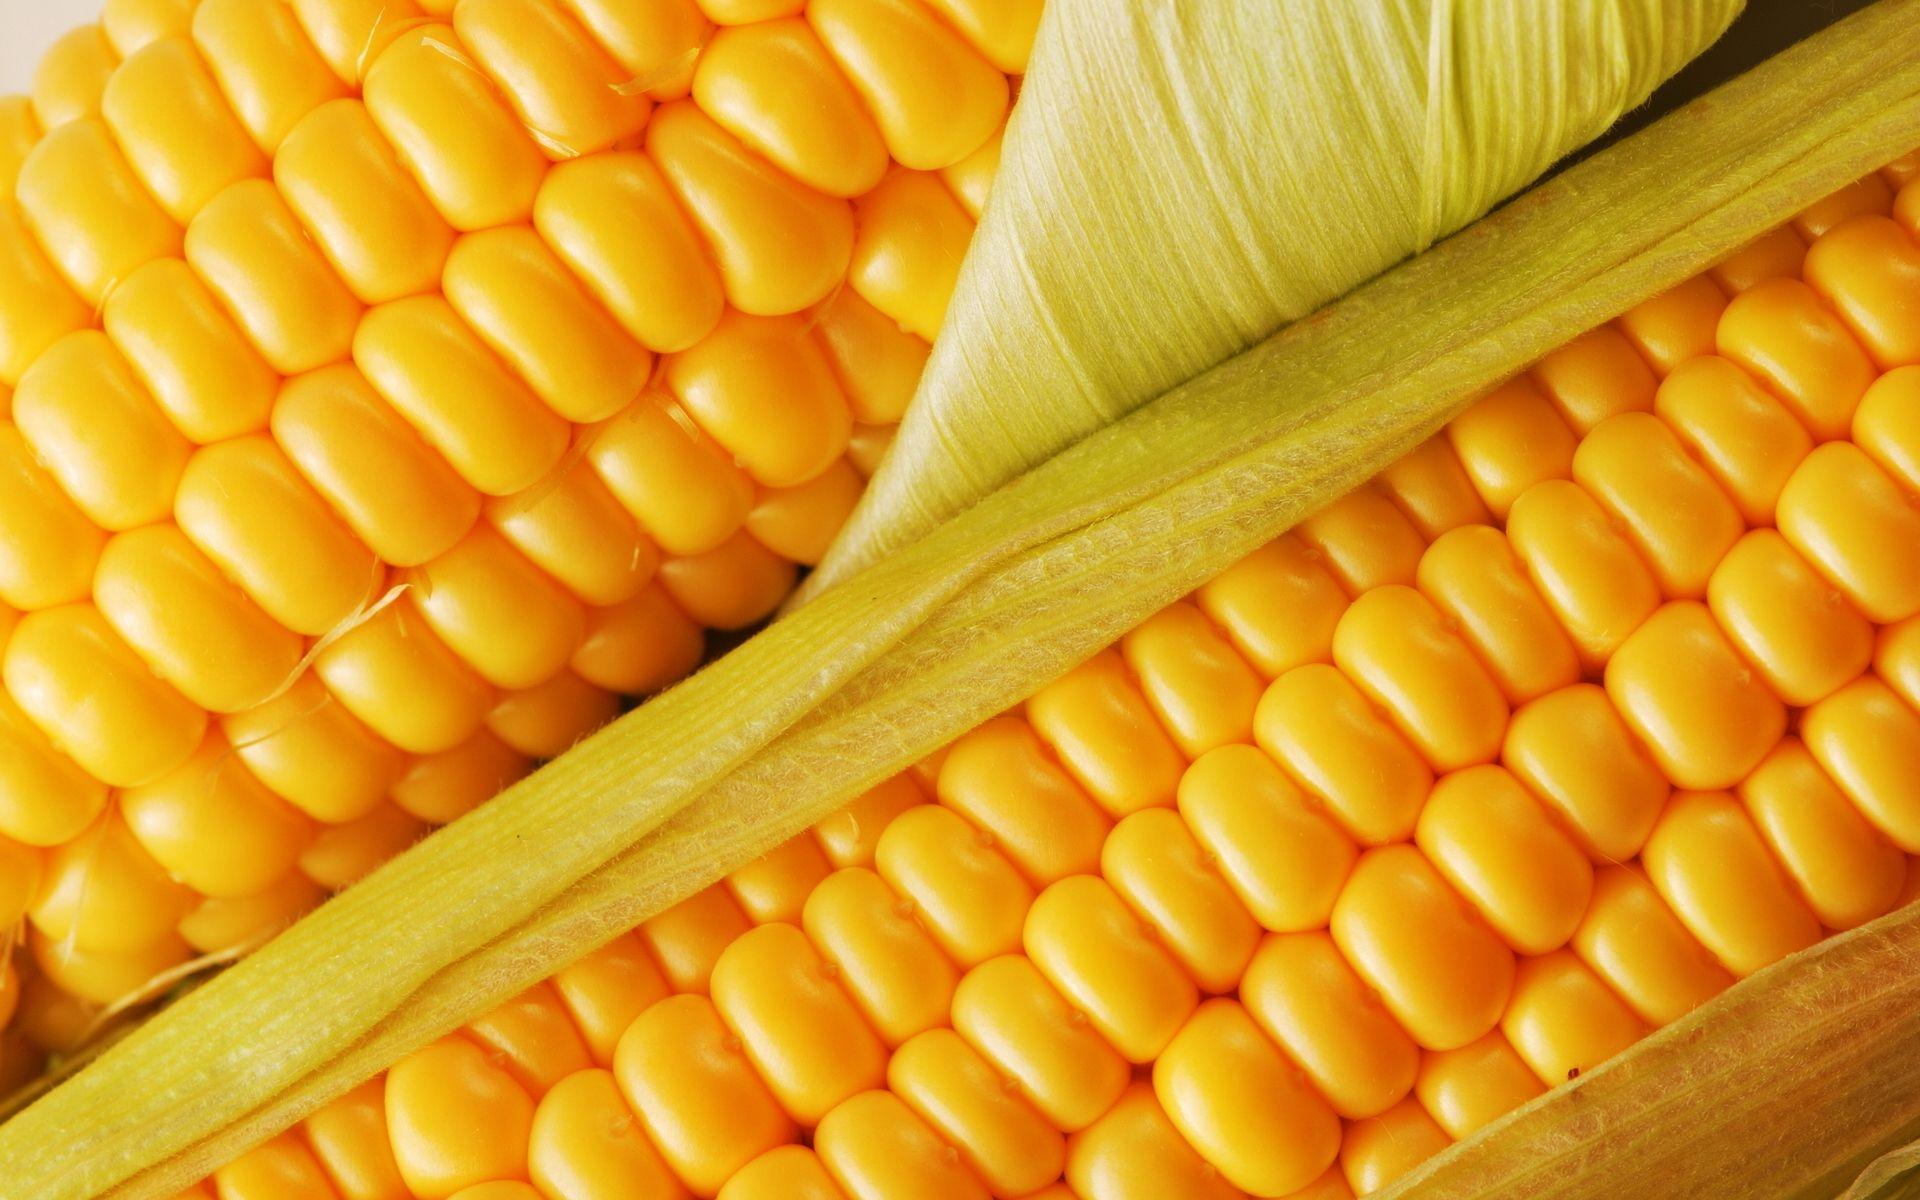 juicy corn wallpaper and image, picture, photo